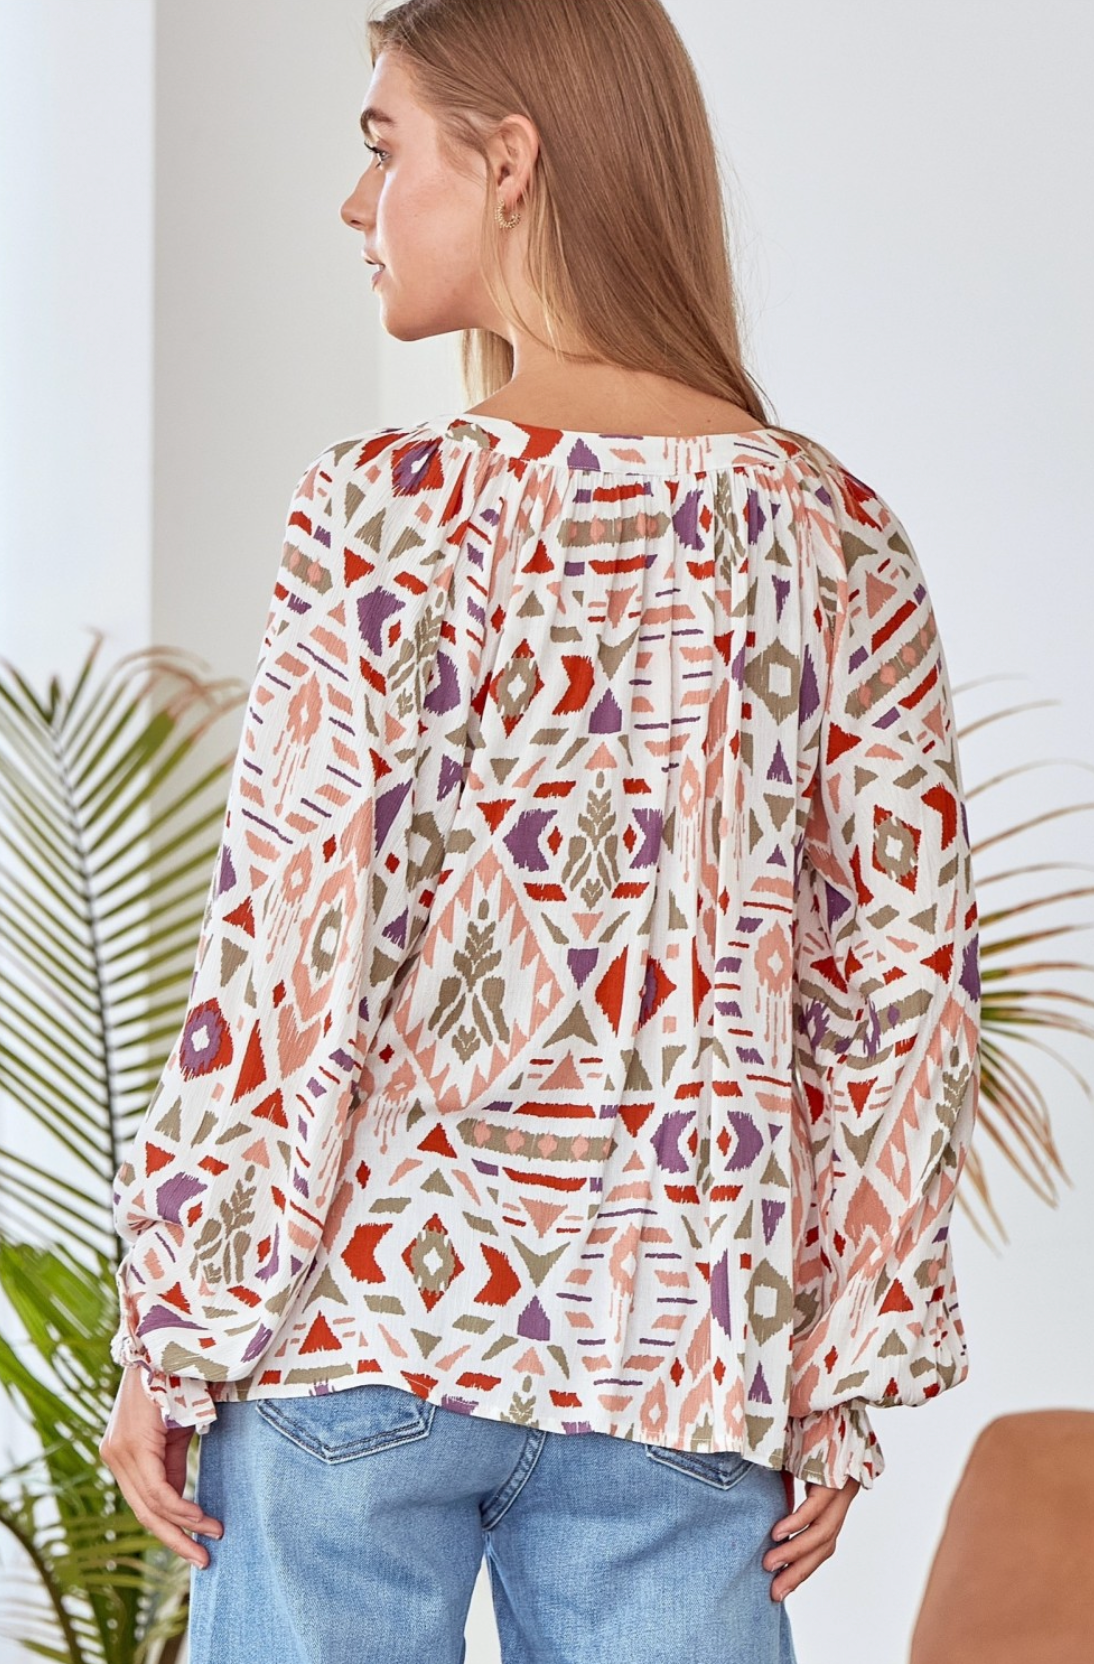 Andree by Unit- Printed Woven Top in Ivory Multi